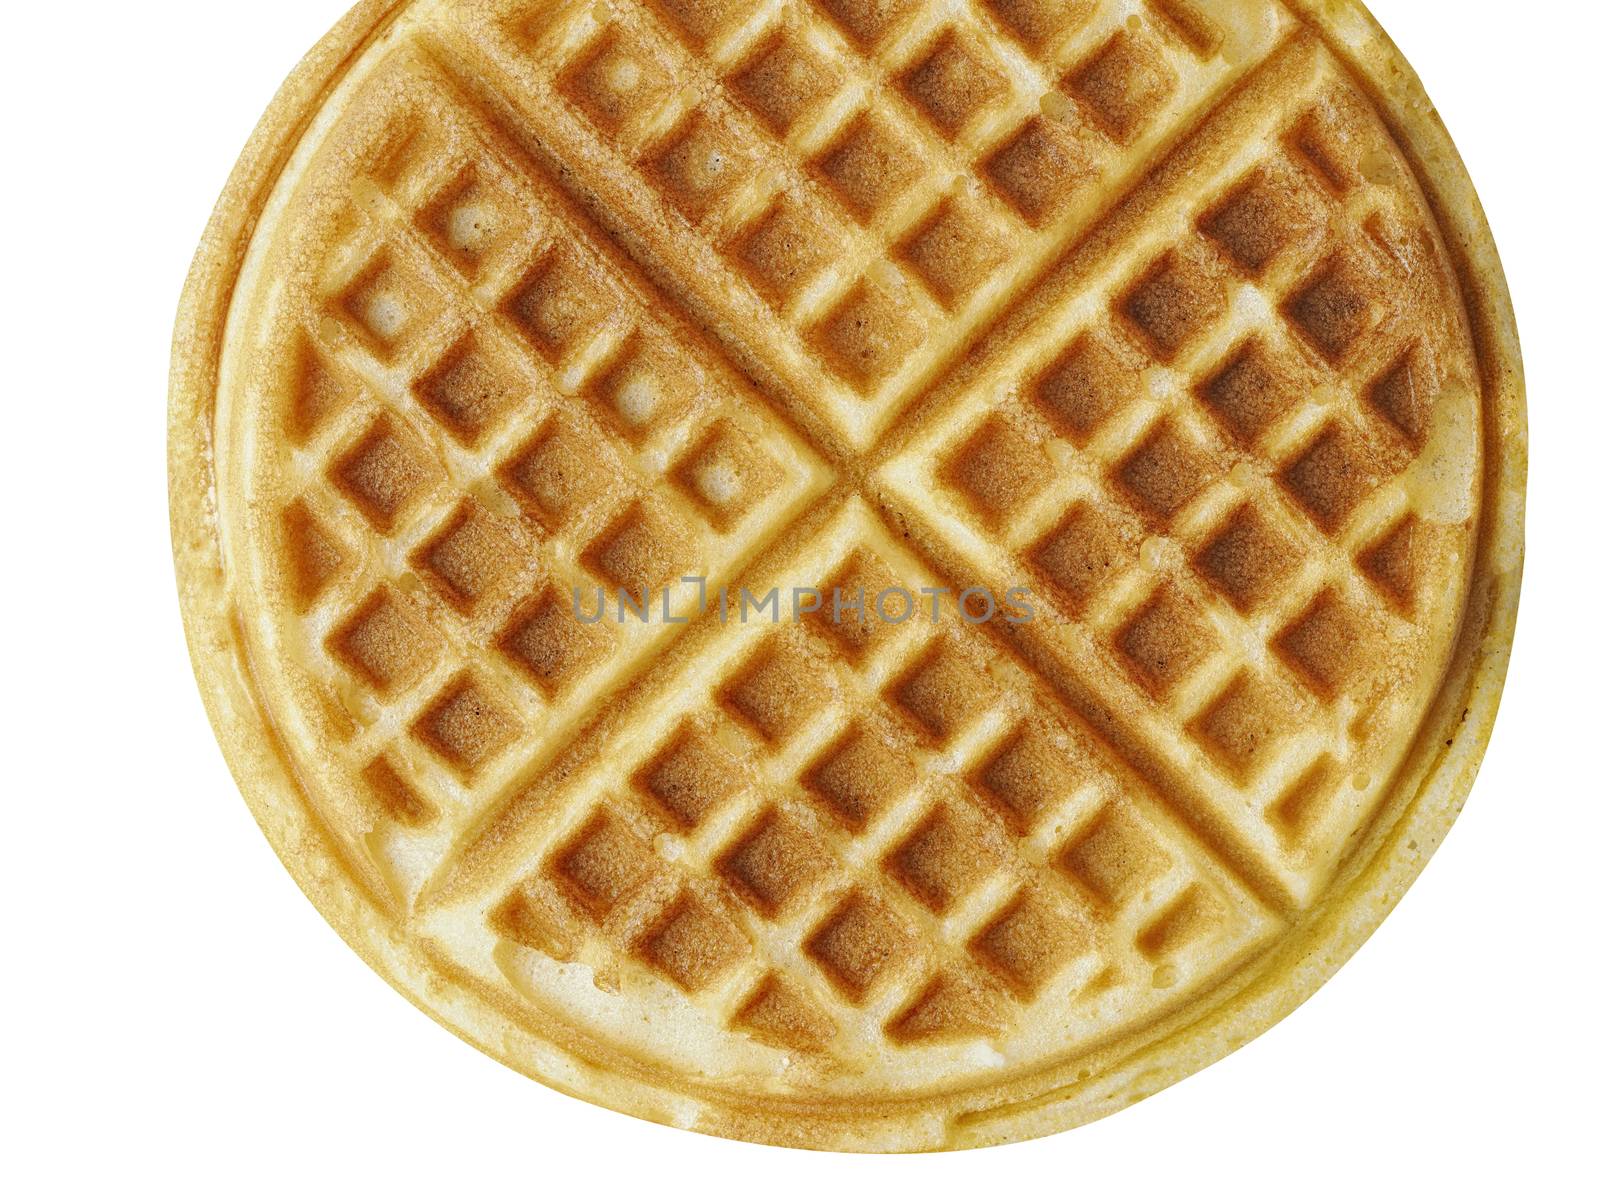 close up of plain belgium american waffles isolated